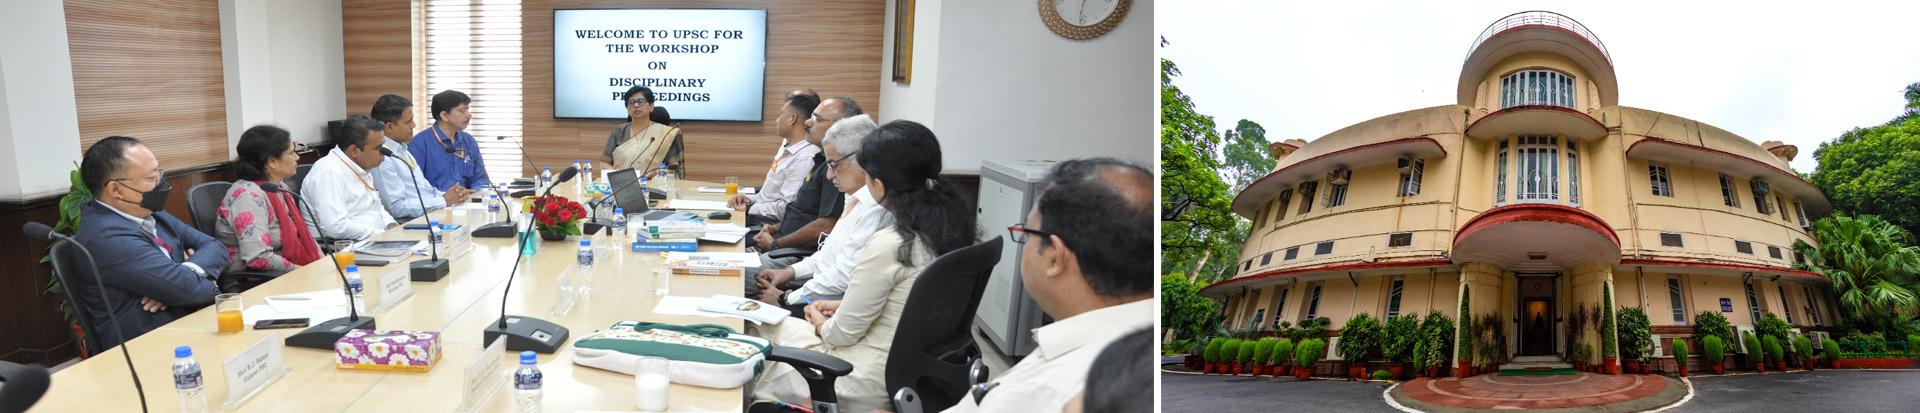 Smt. Vasudha Mishra, Secretary, UPSC addressing the officers of the State Public Service Commissions during the workshop organized by the UPSC on “Disciplinary Proceedings” held on 07/09/2022.